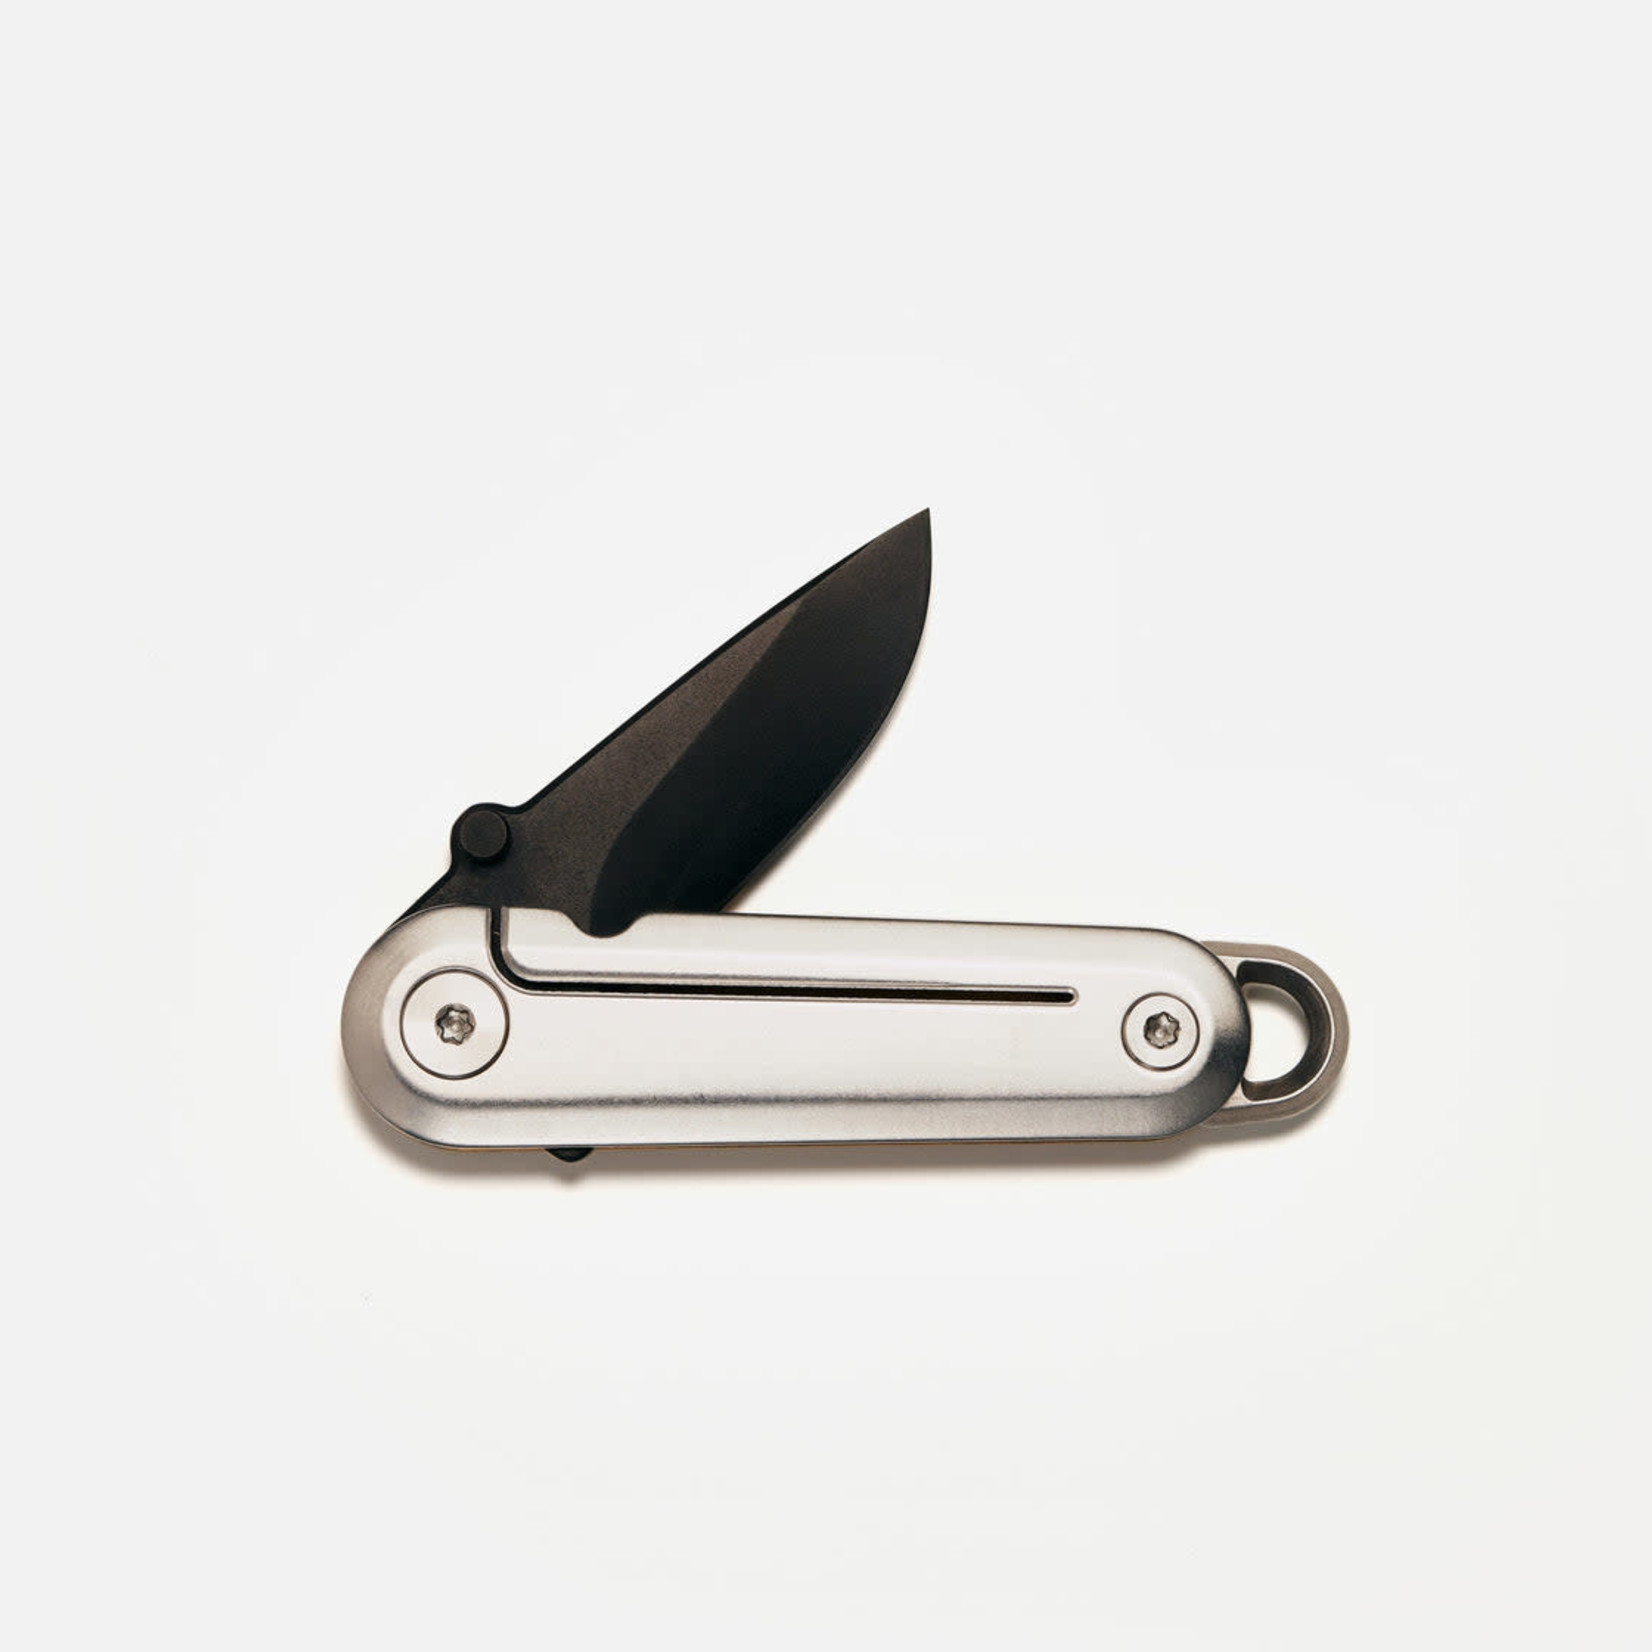 Craighill Craighill Lark Knife TriColor